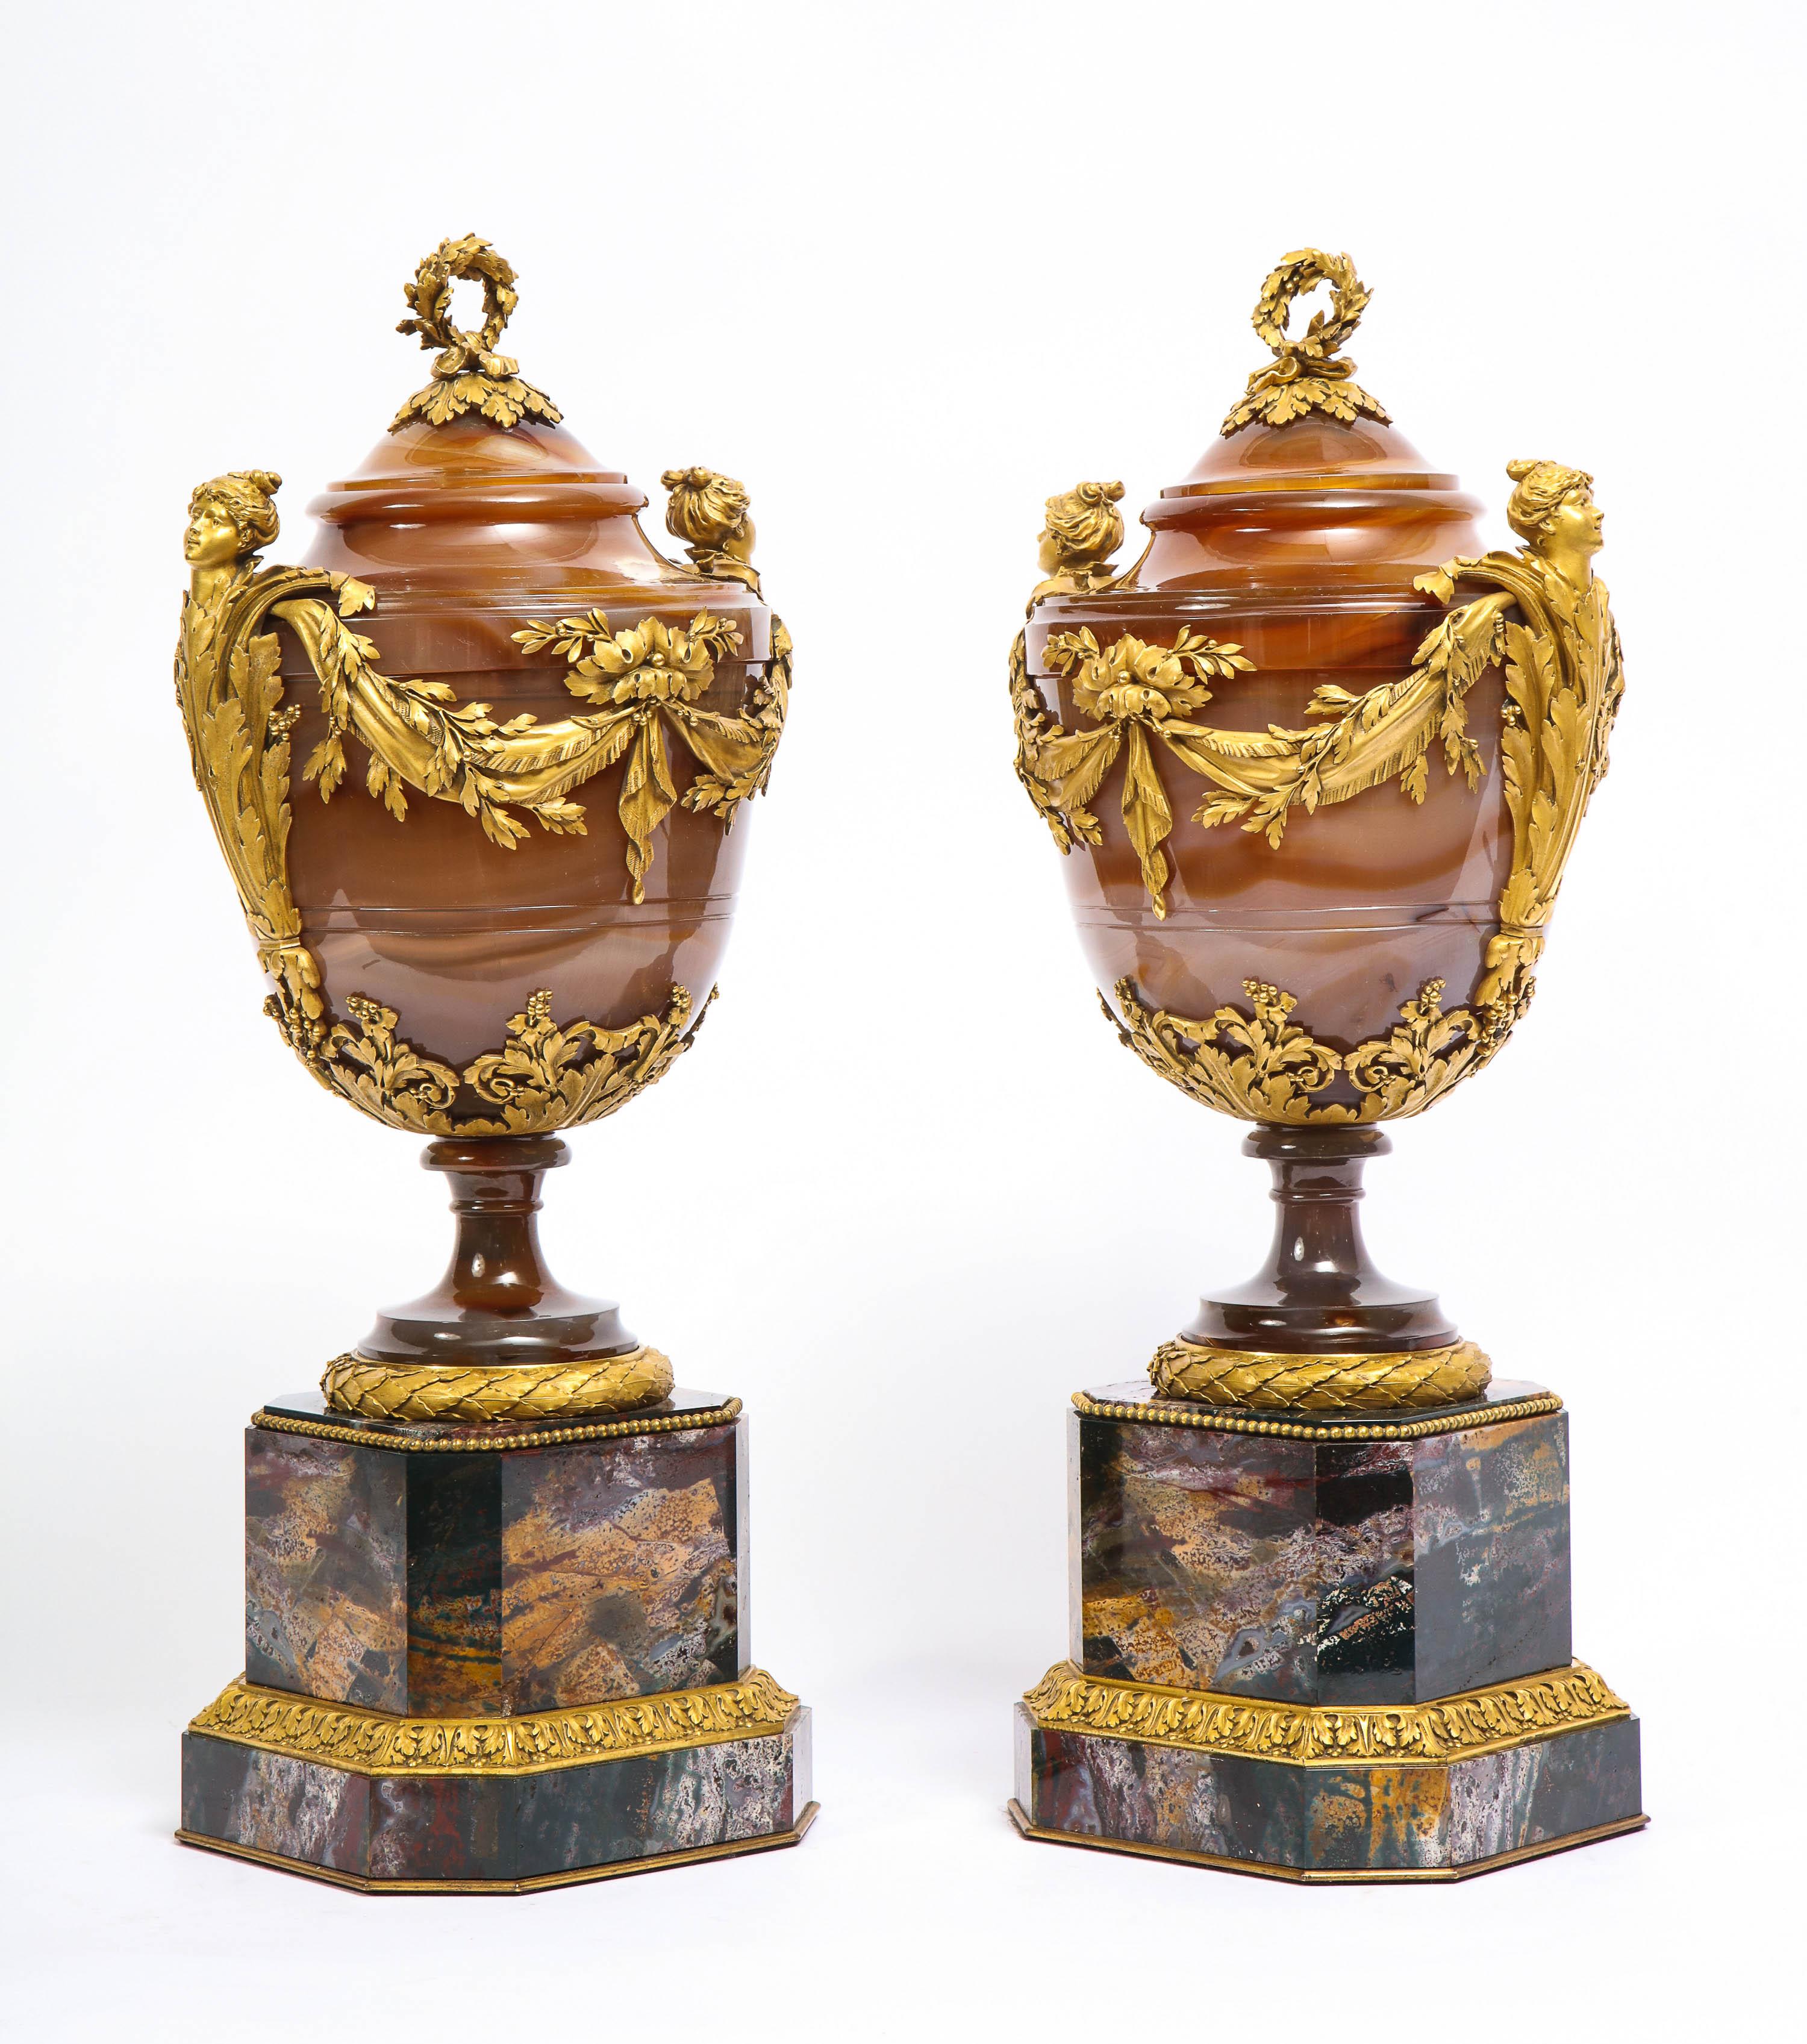 A magnificent and highly important pair of Russian Imperial Louis XVI style agate and bloodstone ormolu-mounted Jasper vases with agate and ormolu wreath finial covers. Both vases are of tapered ovoid form and mounted on the center of each body are